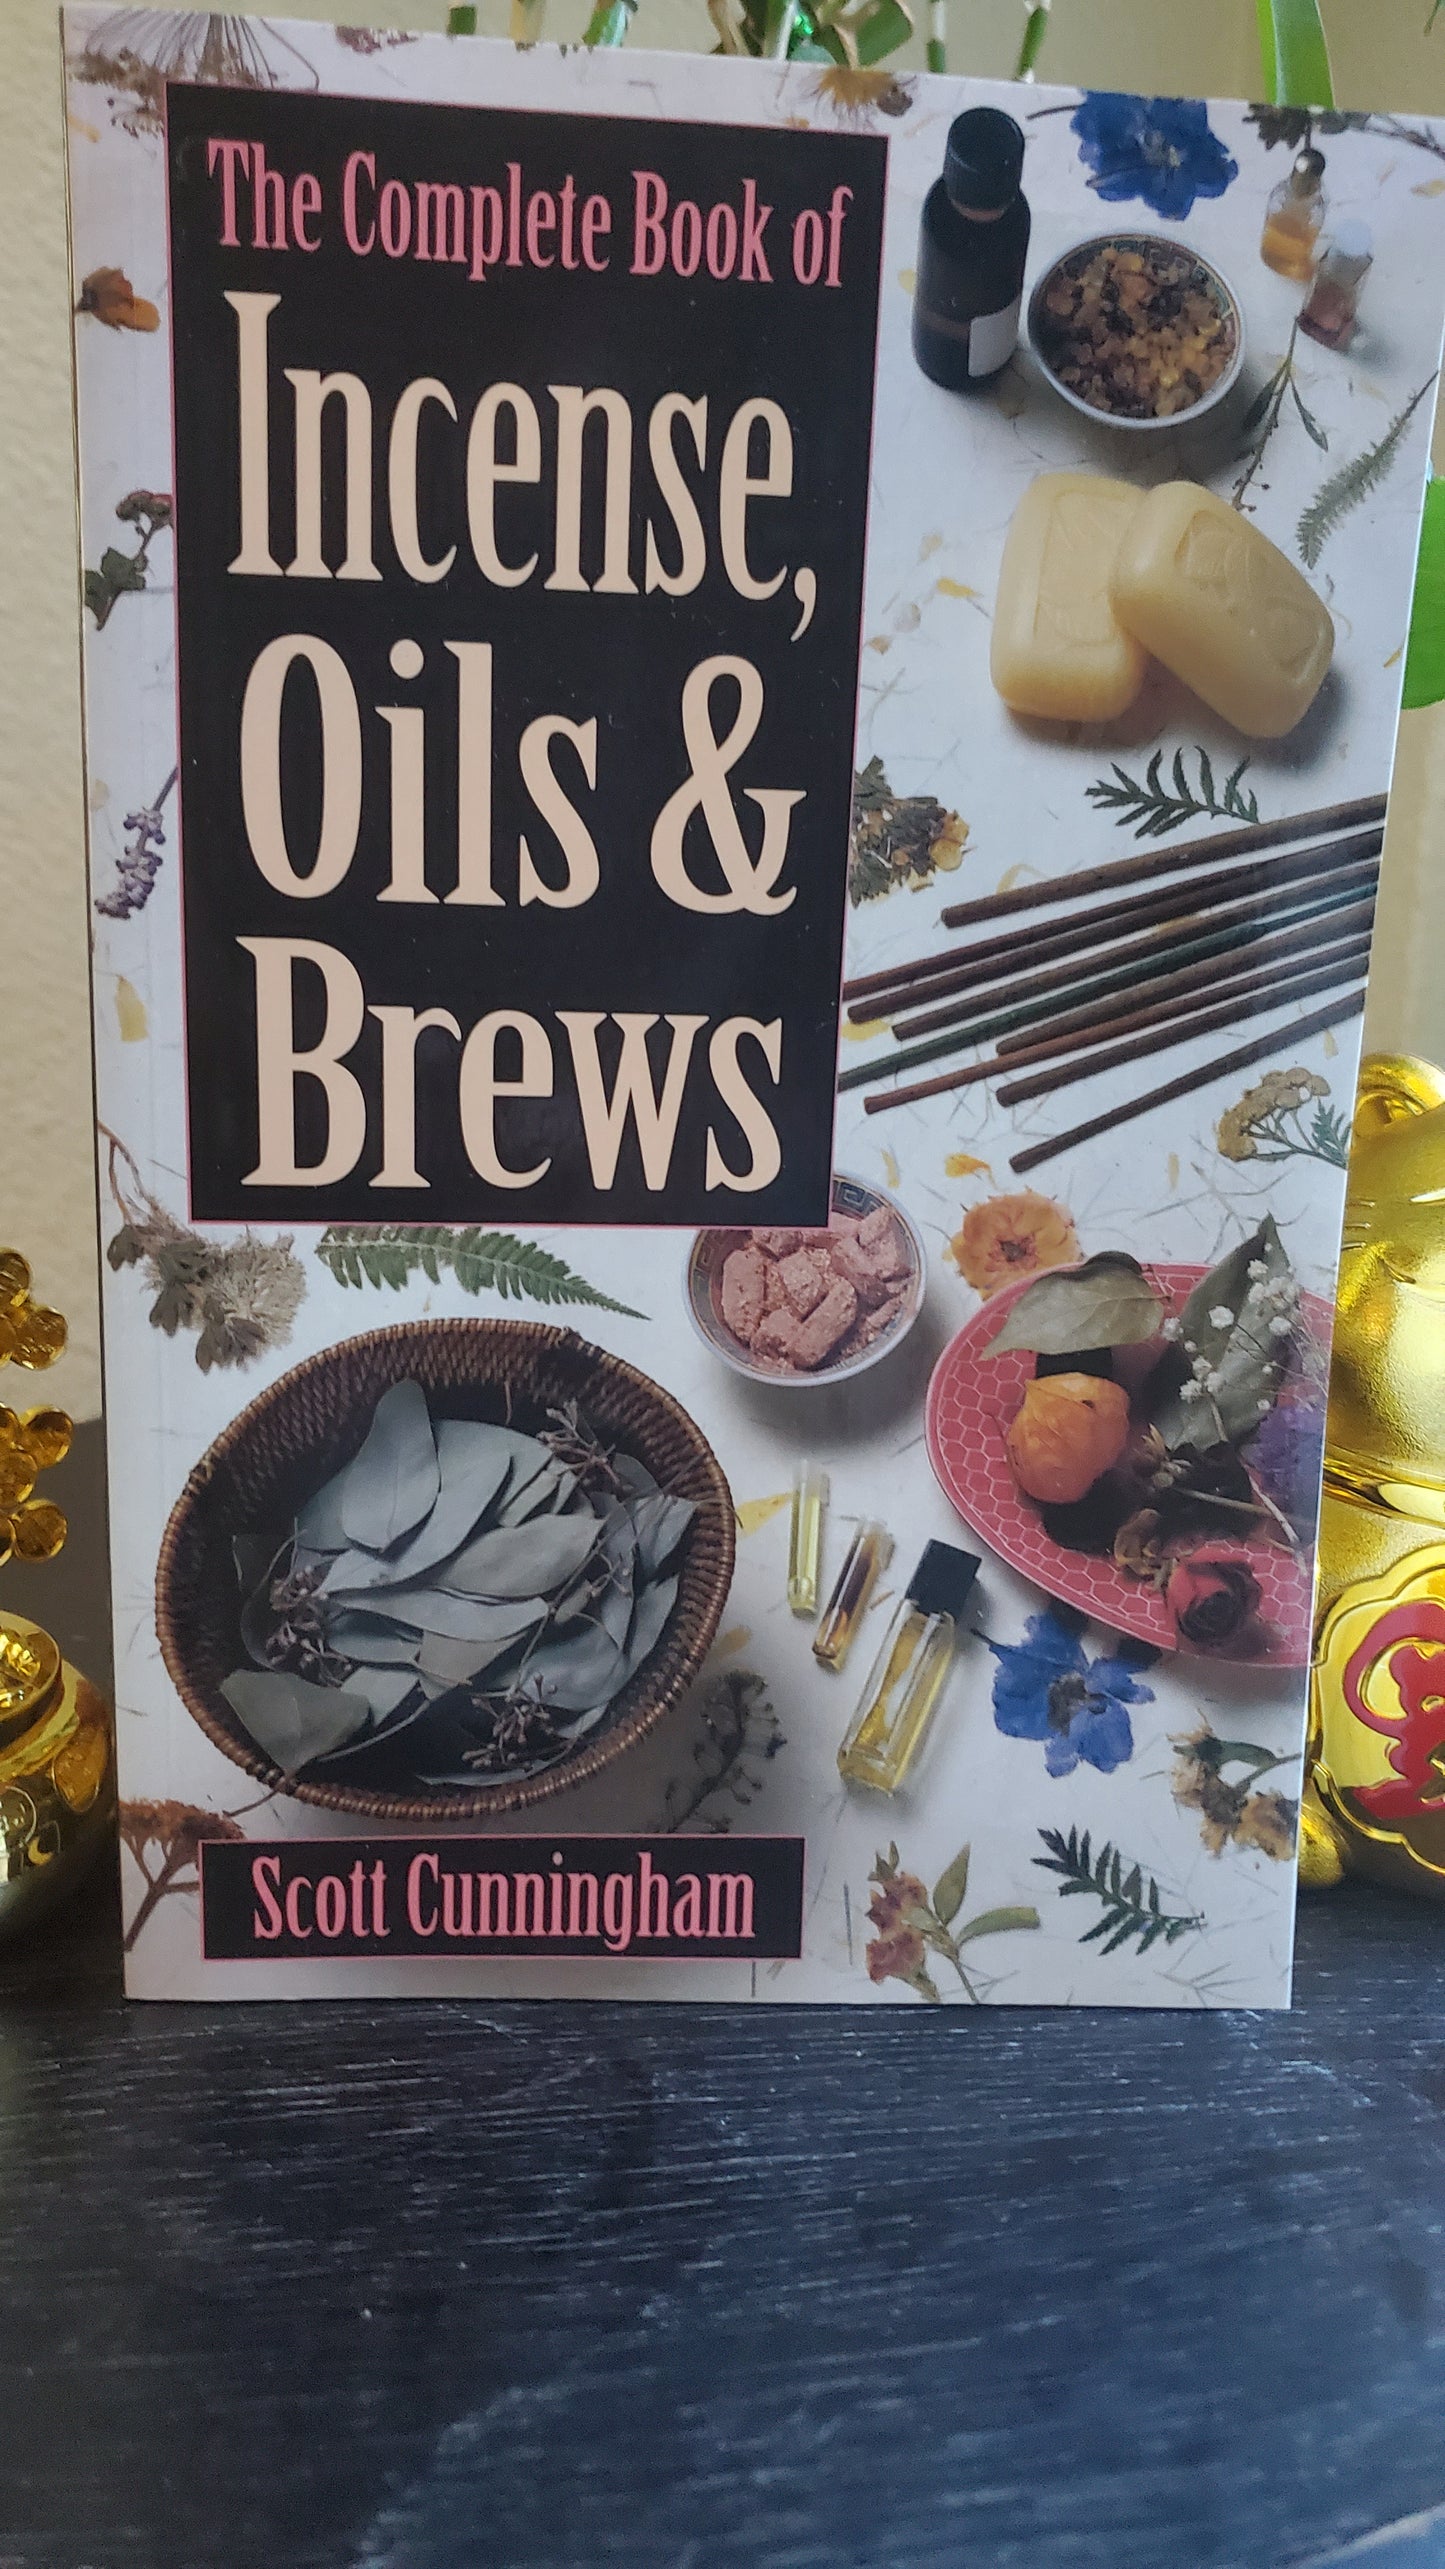 The Complete Book of Incense, Oils & Brews by Scott Cunningham #MustHave for #HoodooPractitioners #Hoodoo #Conjure #ScottCunningham